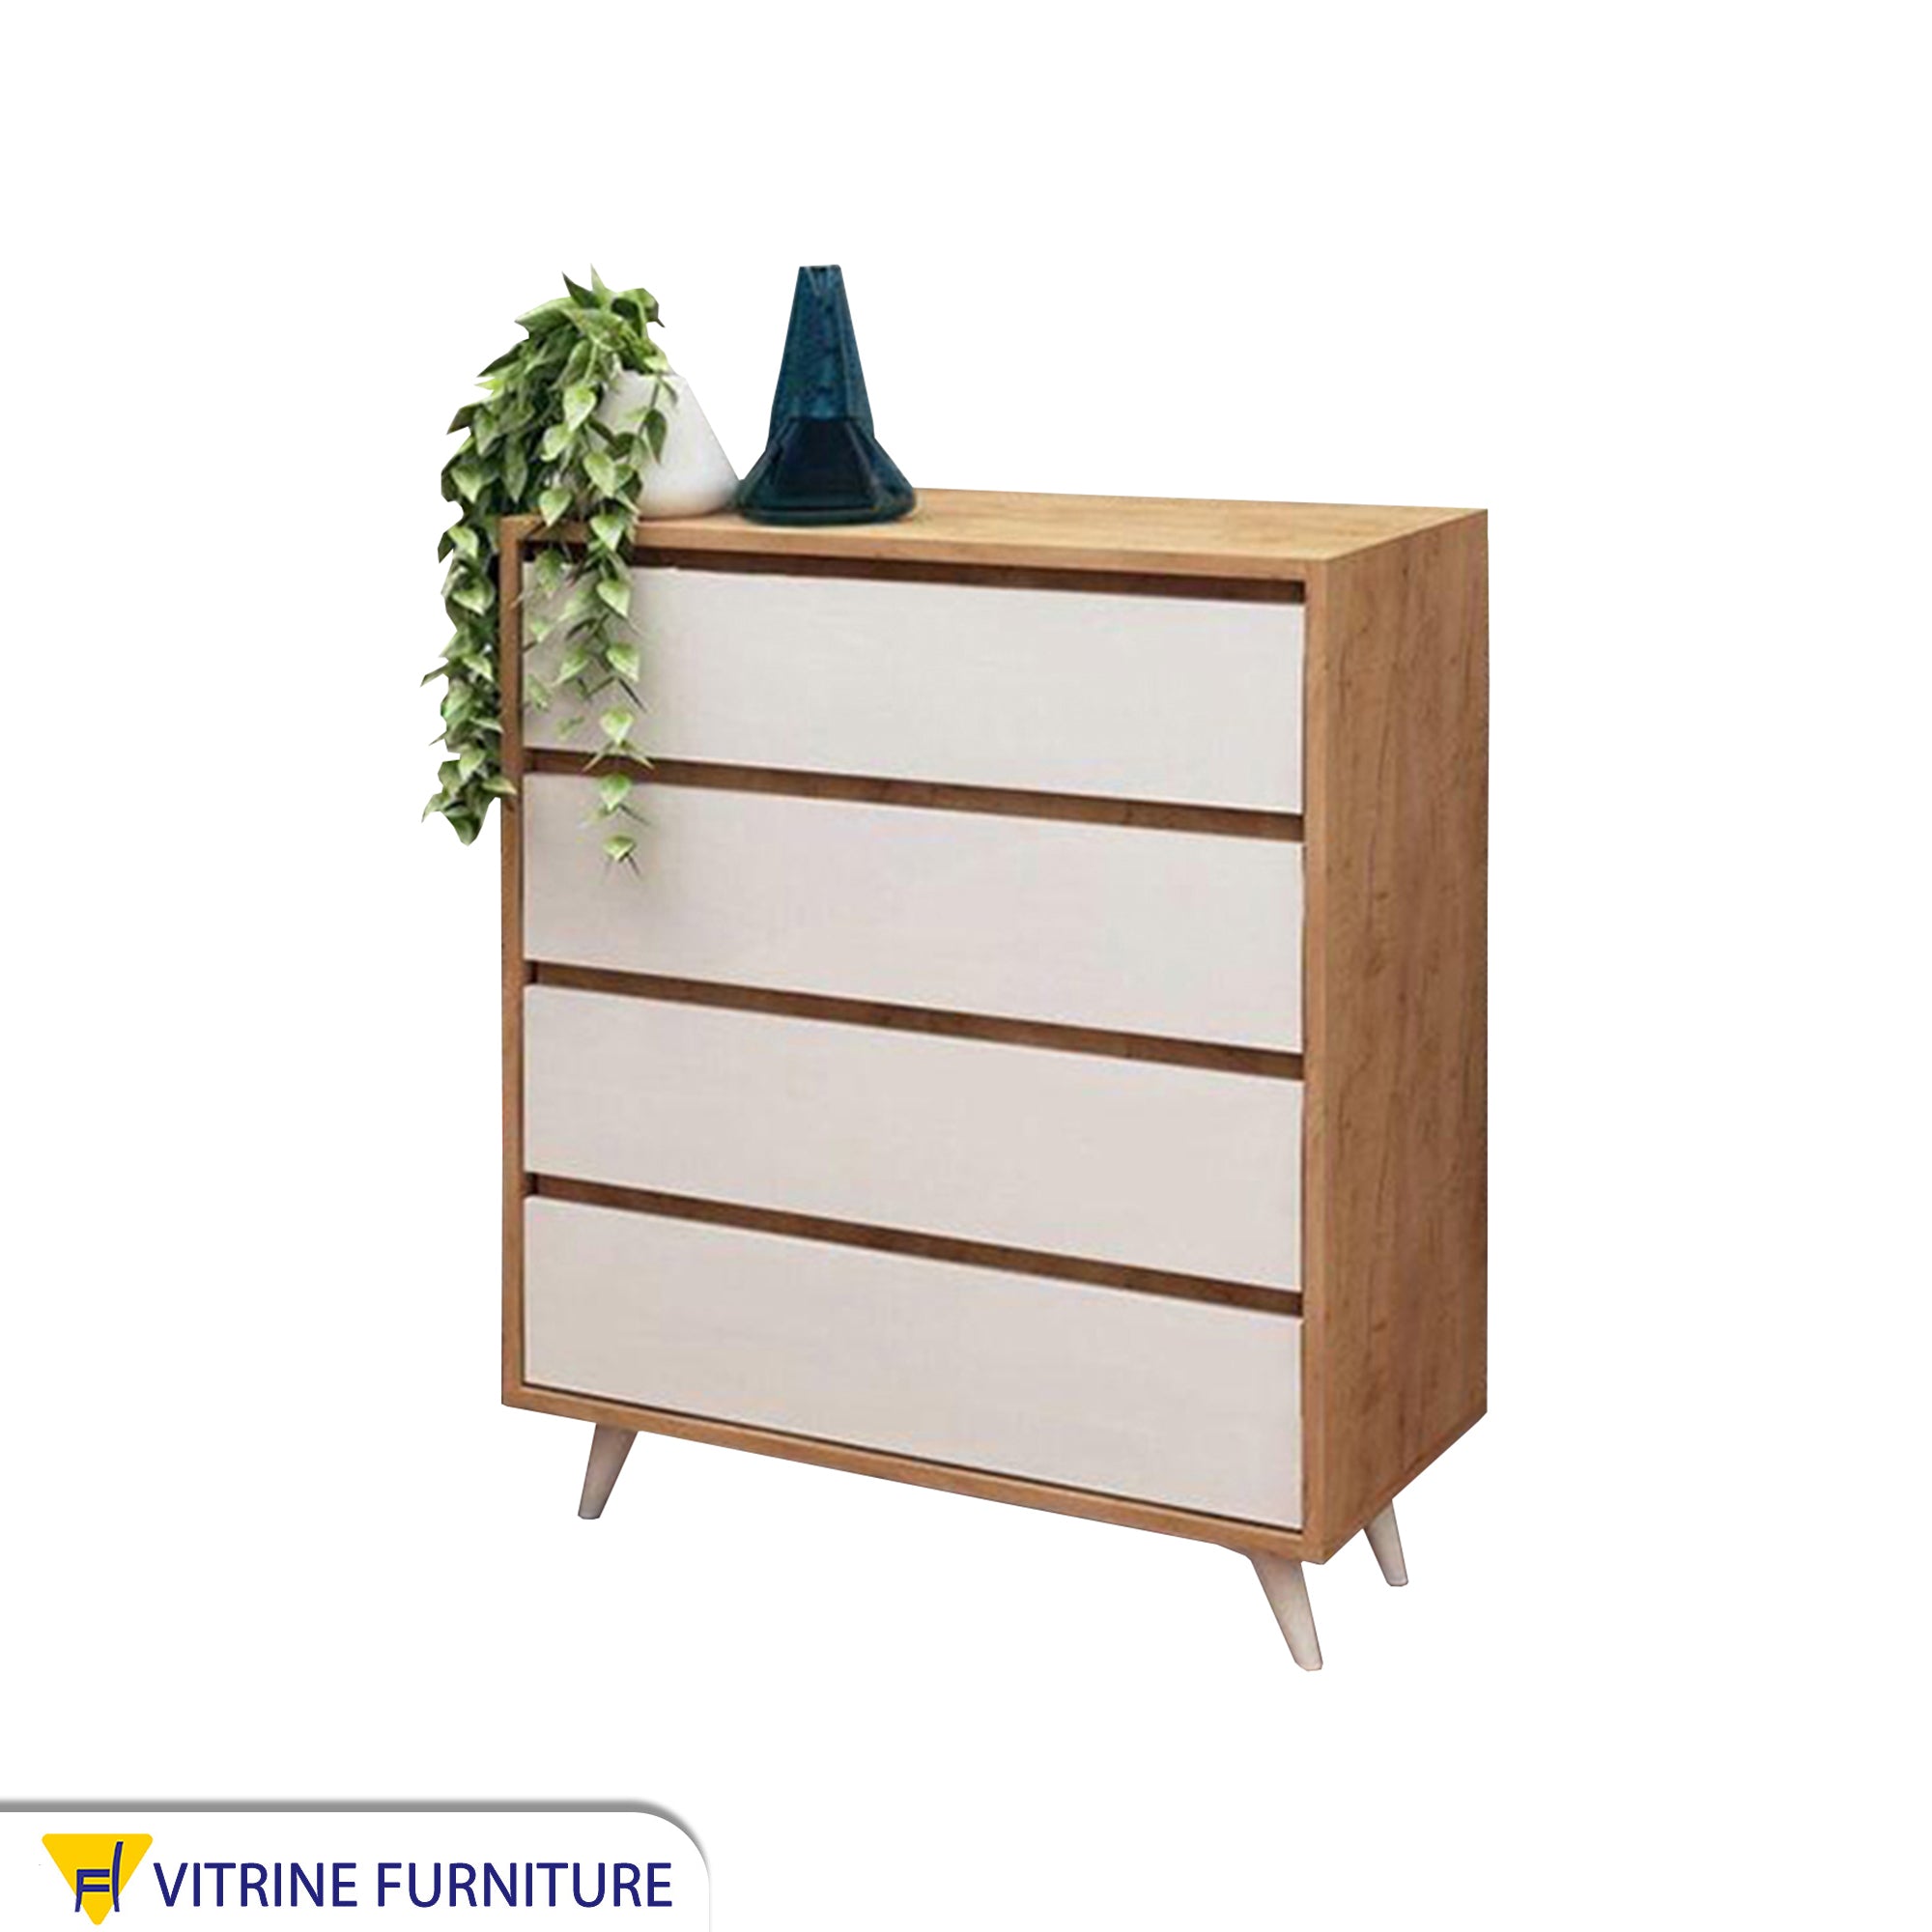 White drawer unit with wooden legs